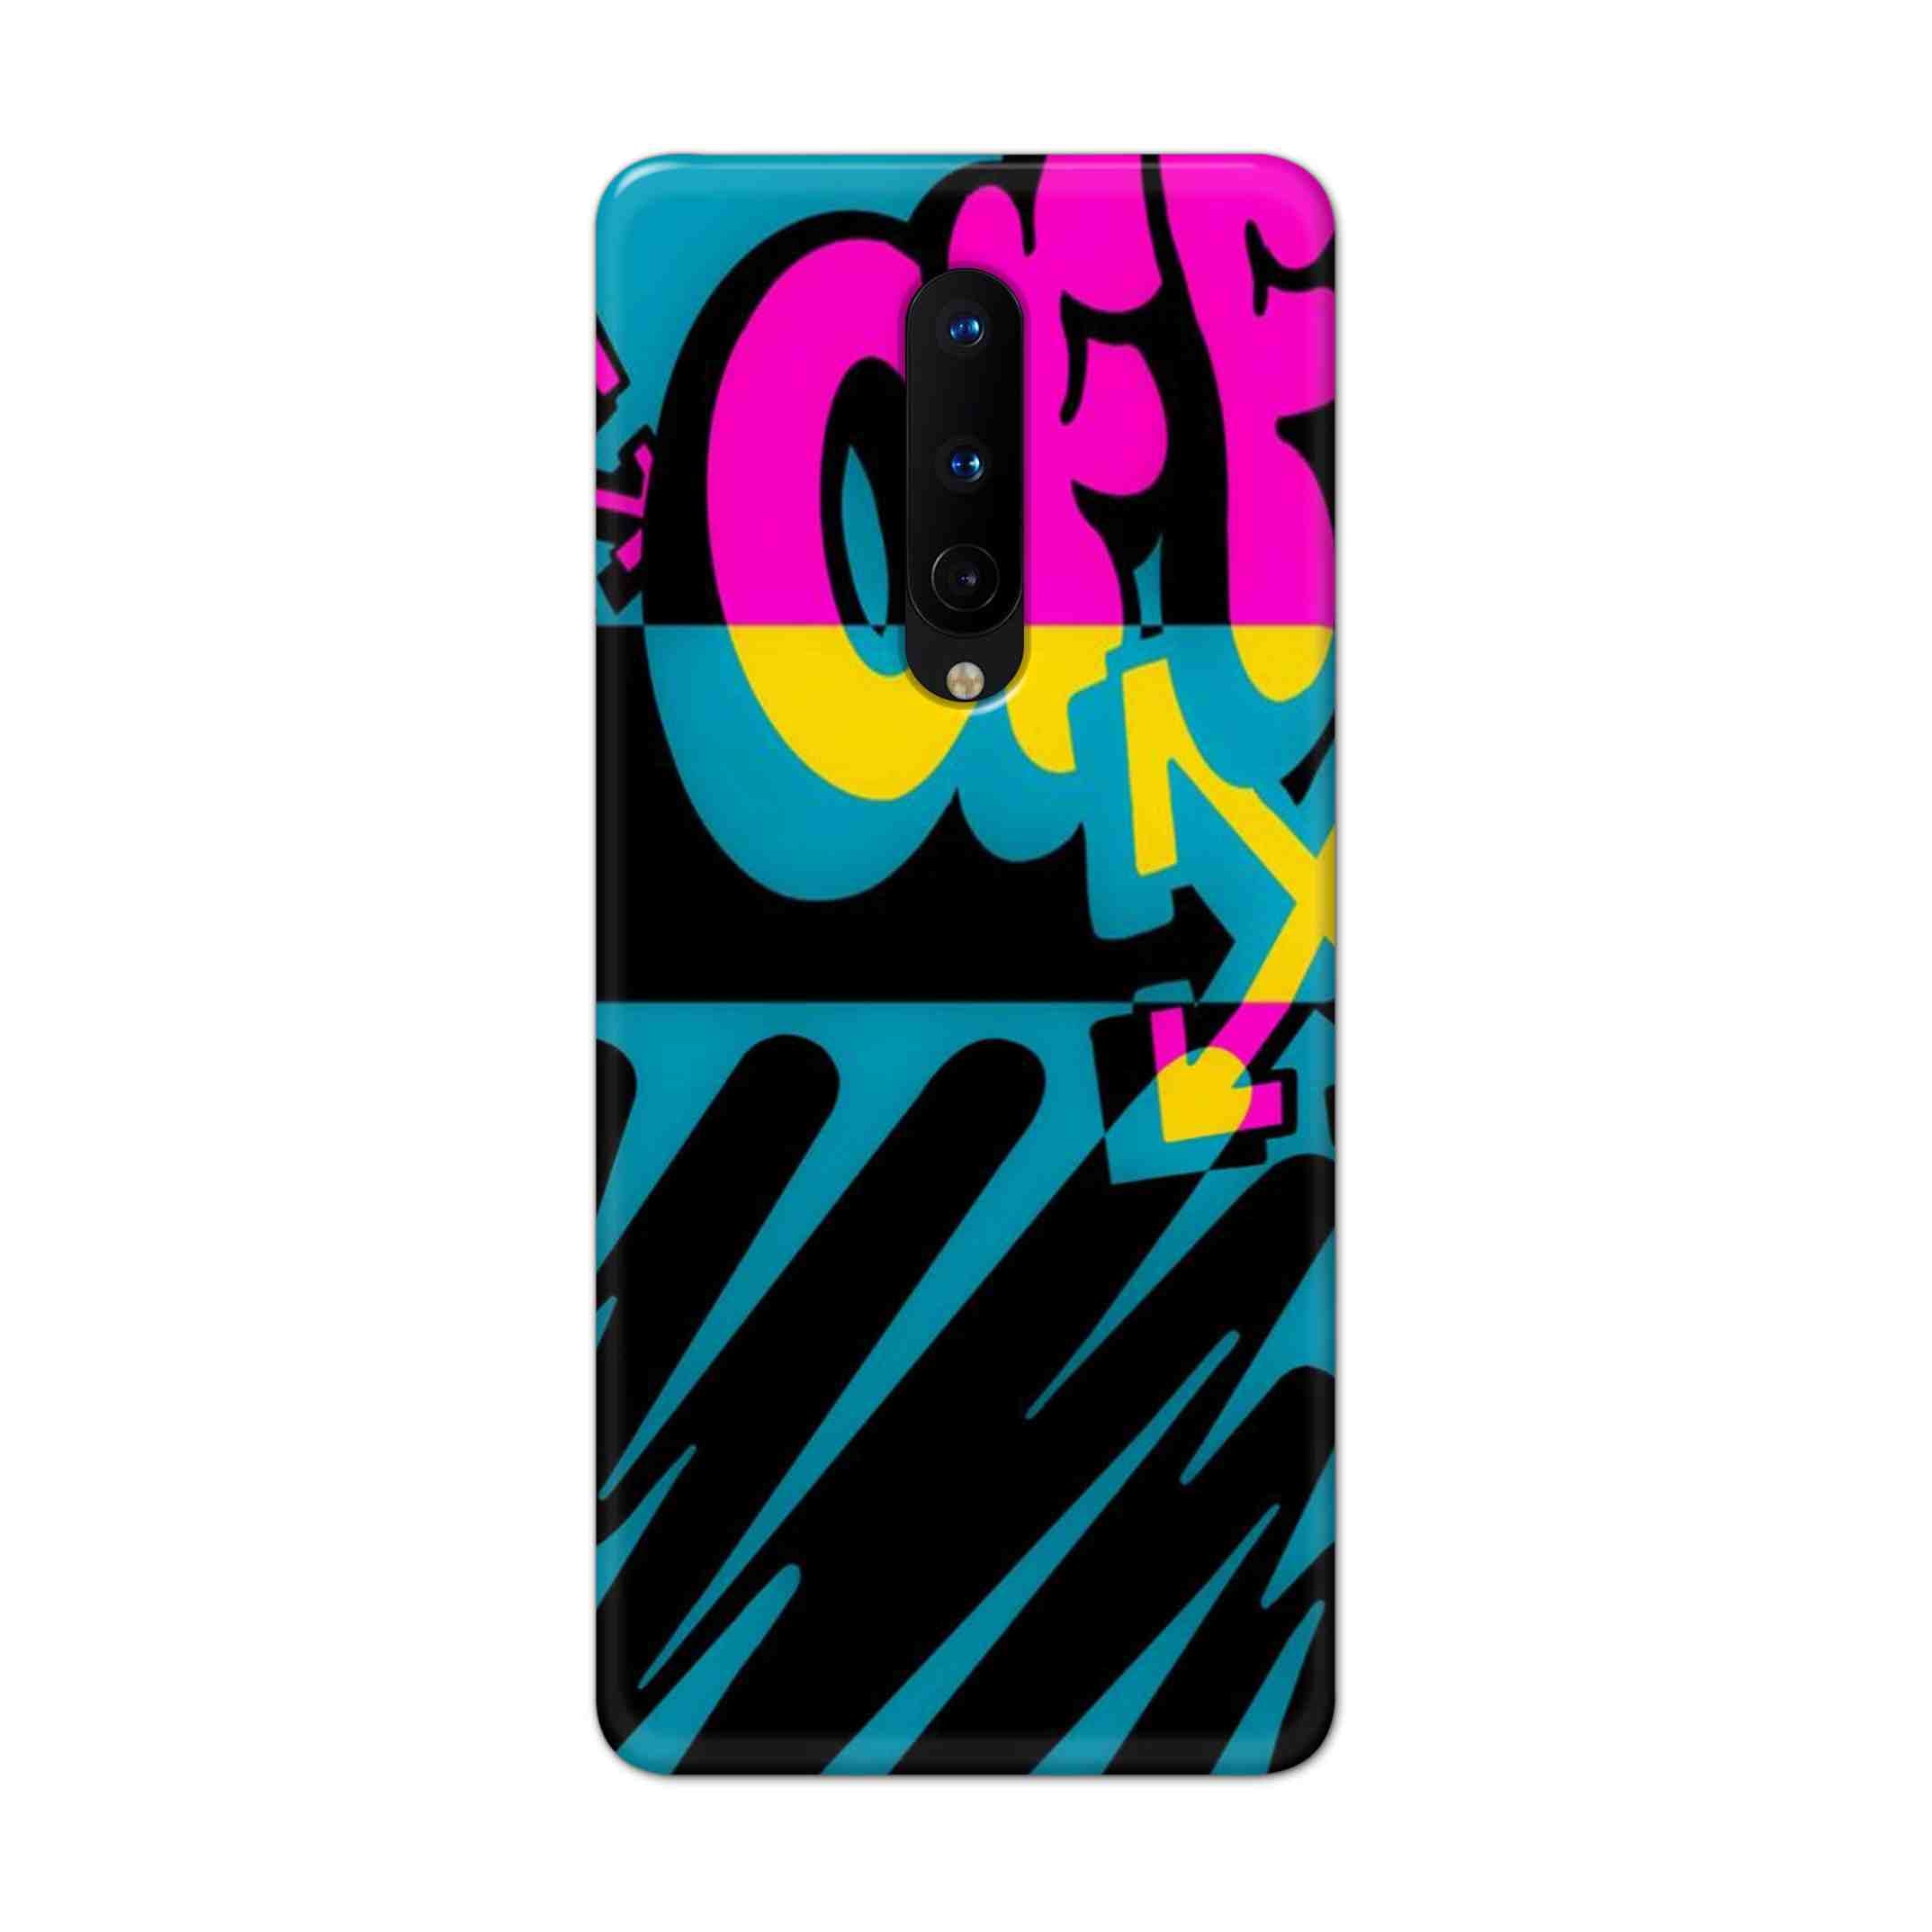 Buy Off Hard Back Mobile Phone Case Cover For OnePlus 8 Online